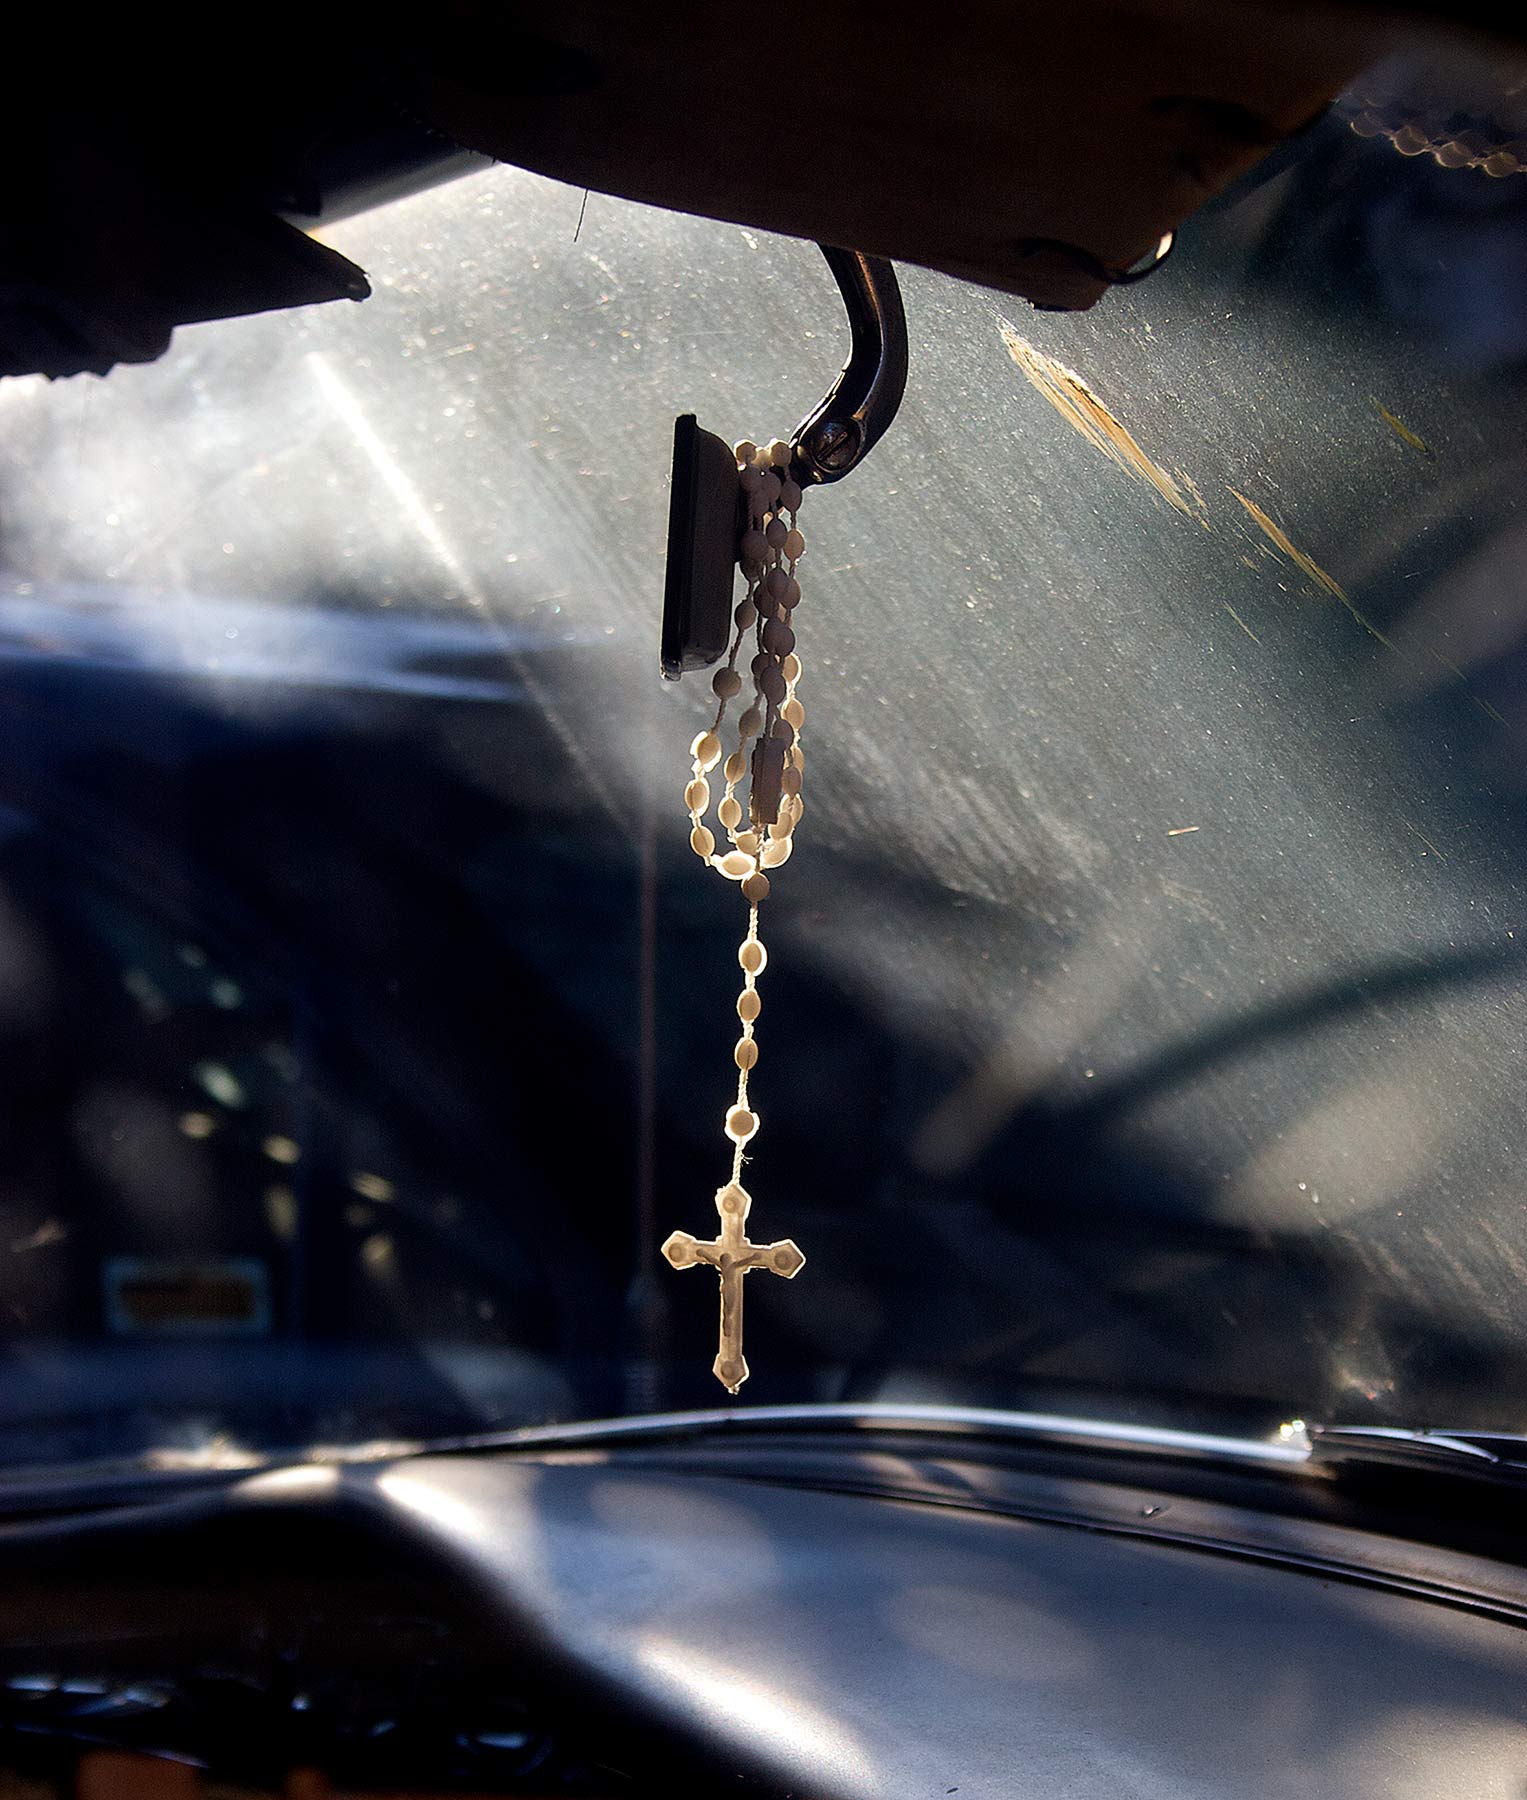 Old Cross hanging from Rearview Mirror in an Old Chevy Car